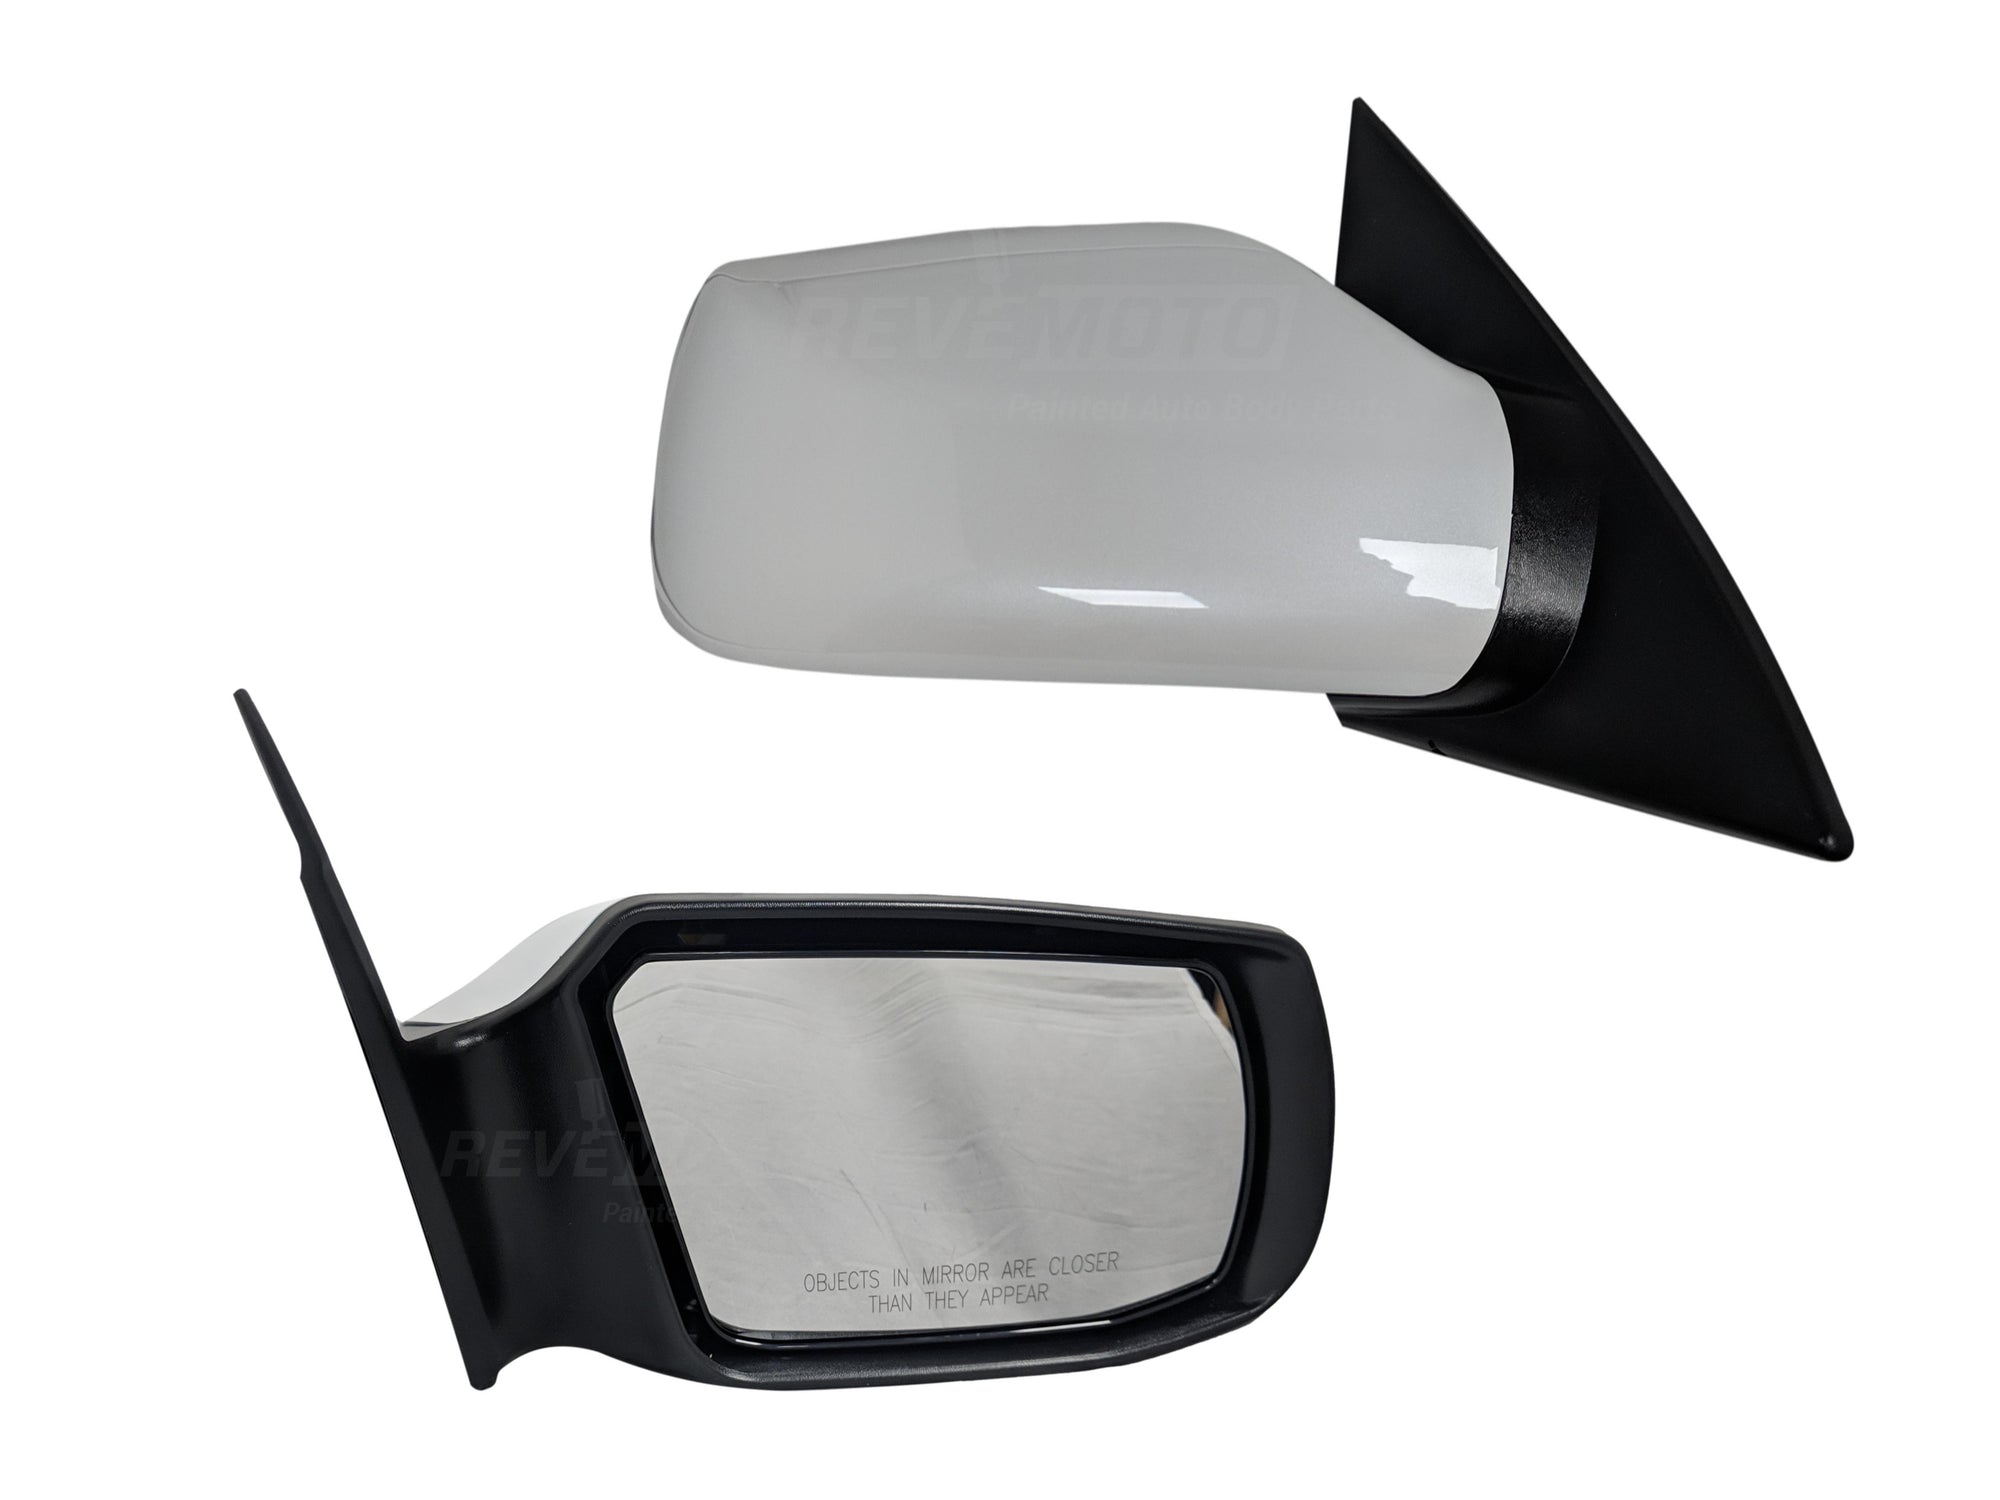 2012 Nissan Altima Passenger Side View Mirror, Without Heated Glass, Without Signal Lamp, 2.5 Liter, Sedan, 4 Door, PaintedSatin White Pearl (QX3) 96301JA04A NI1321163